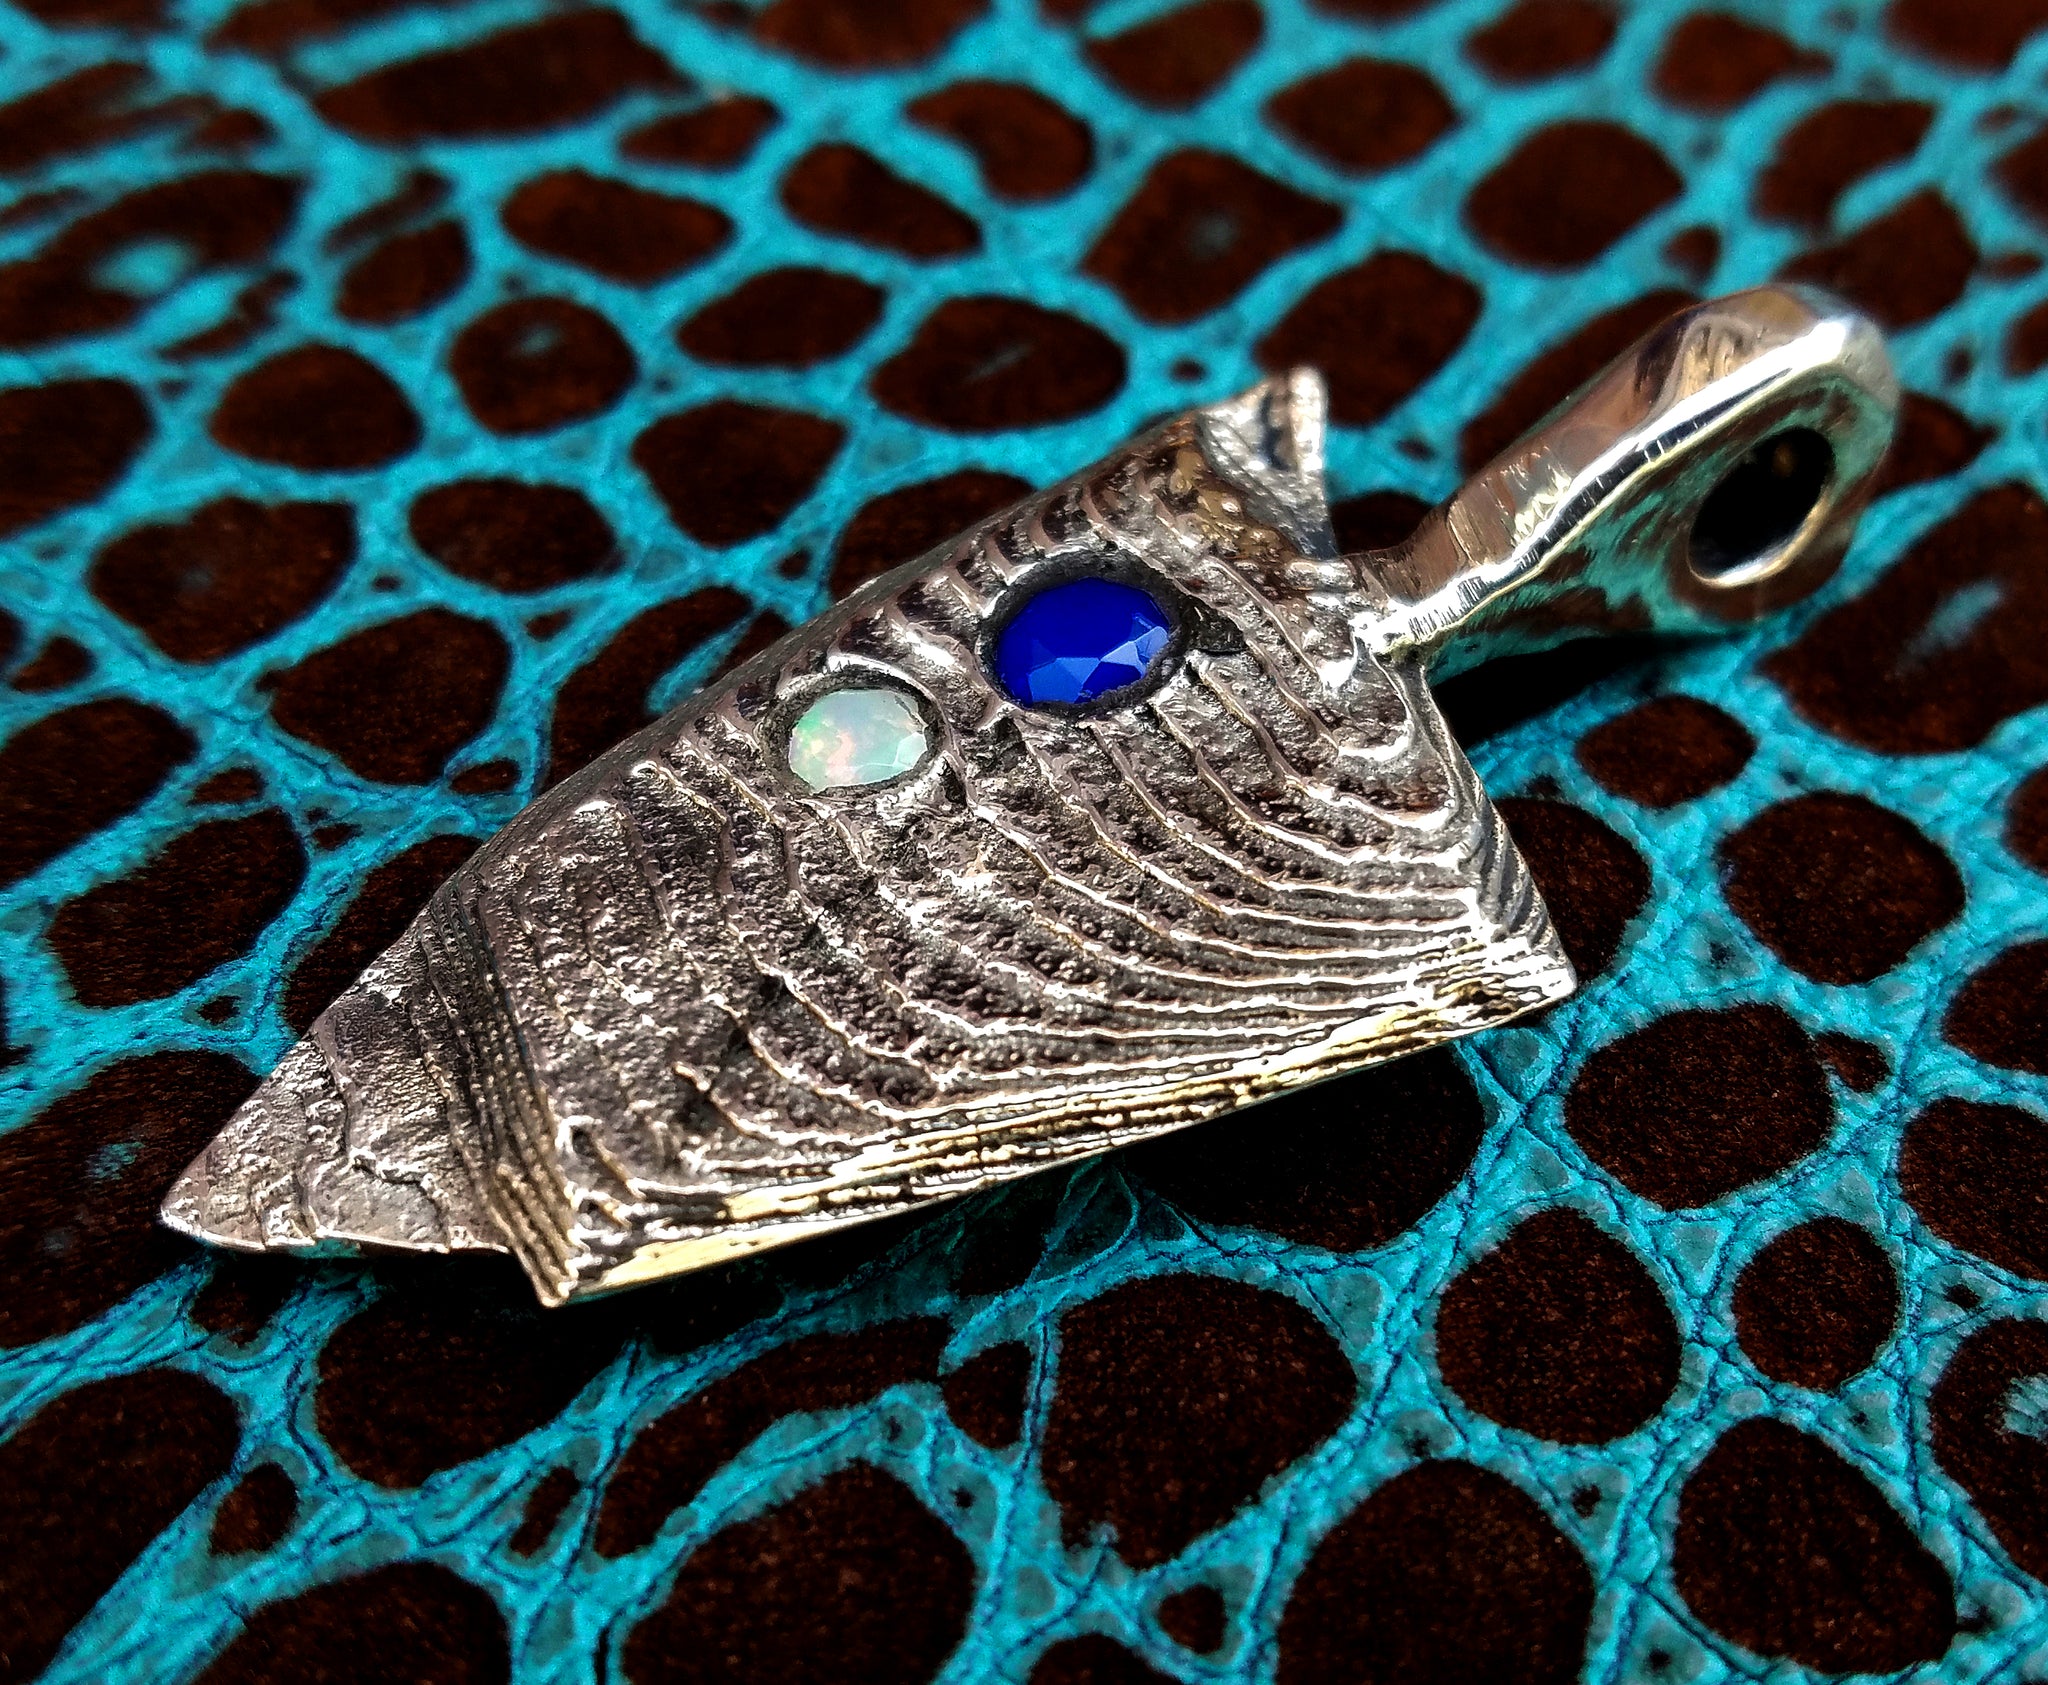 'Alien Artifact' Hand-carved Hand-poured Cuttlefish Cast Pendant #9 by Phantom